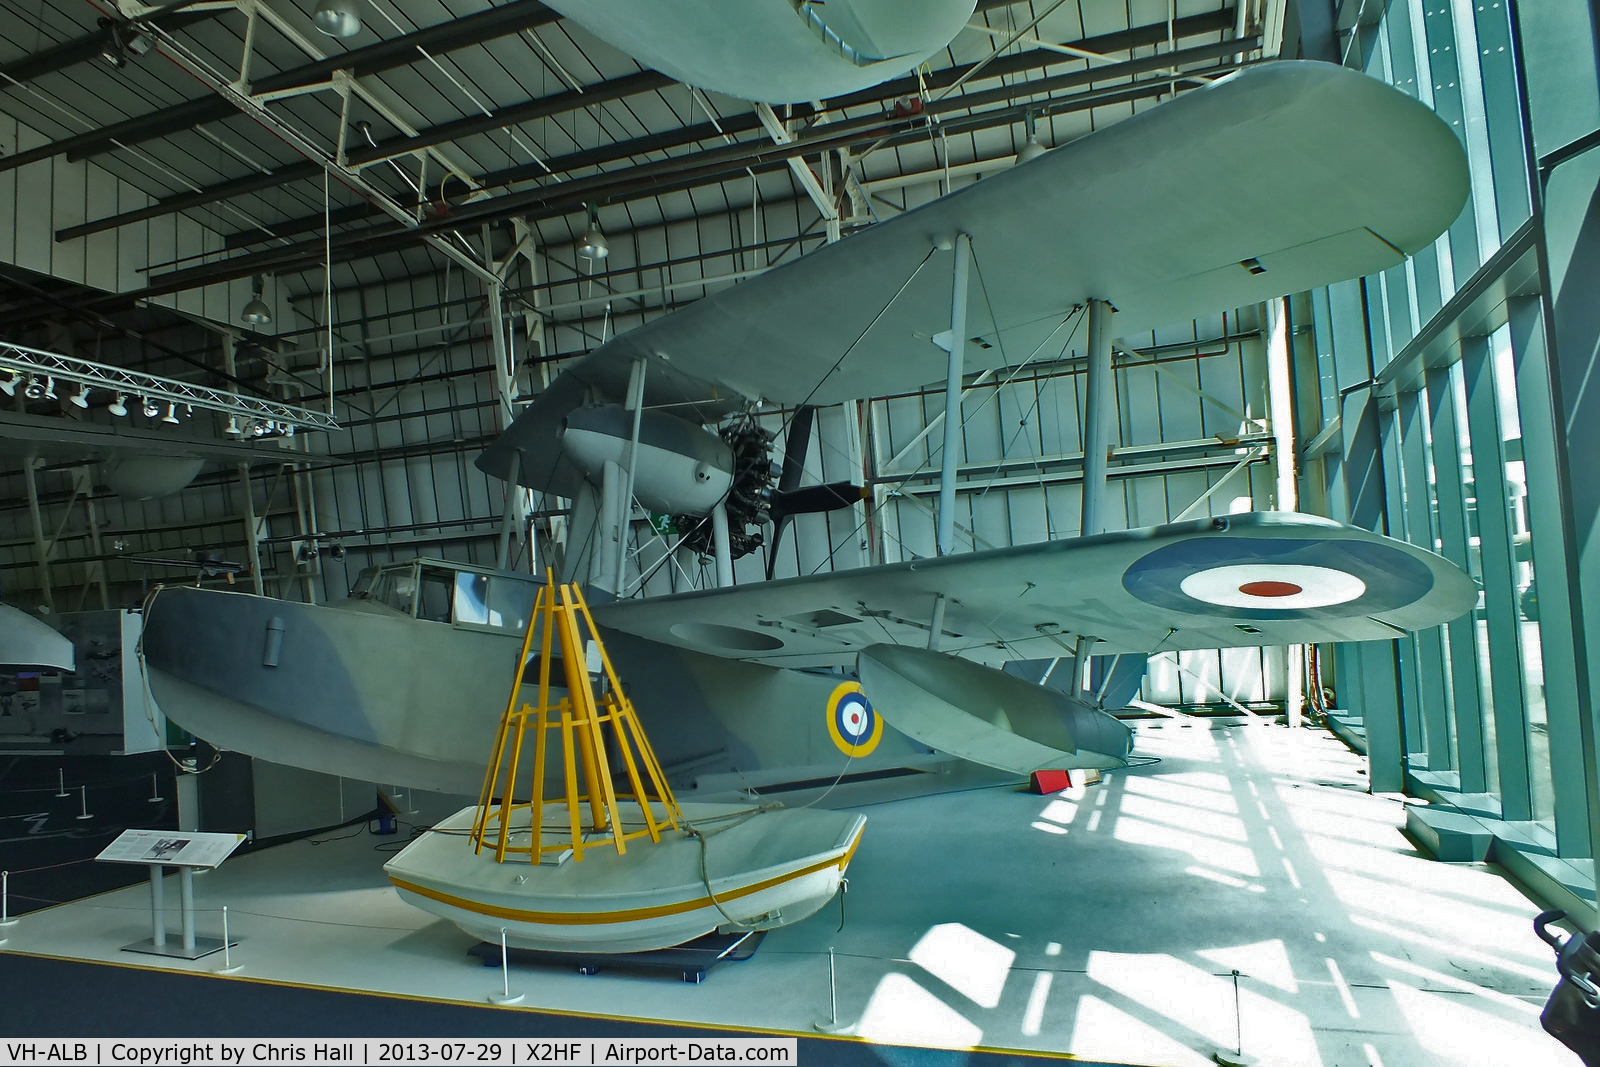 VH-ALB, Supermarine Seagull V C/N Not found A2-4/VH-ALB, Displayed at the RAF Museum, Hendon